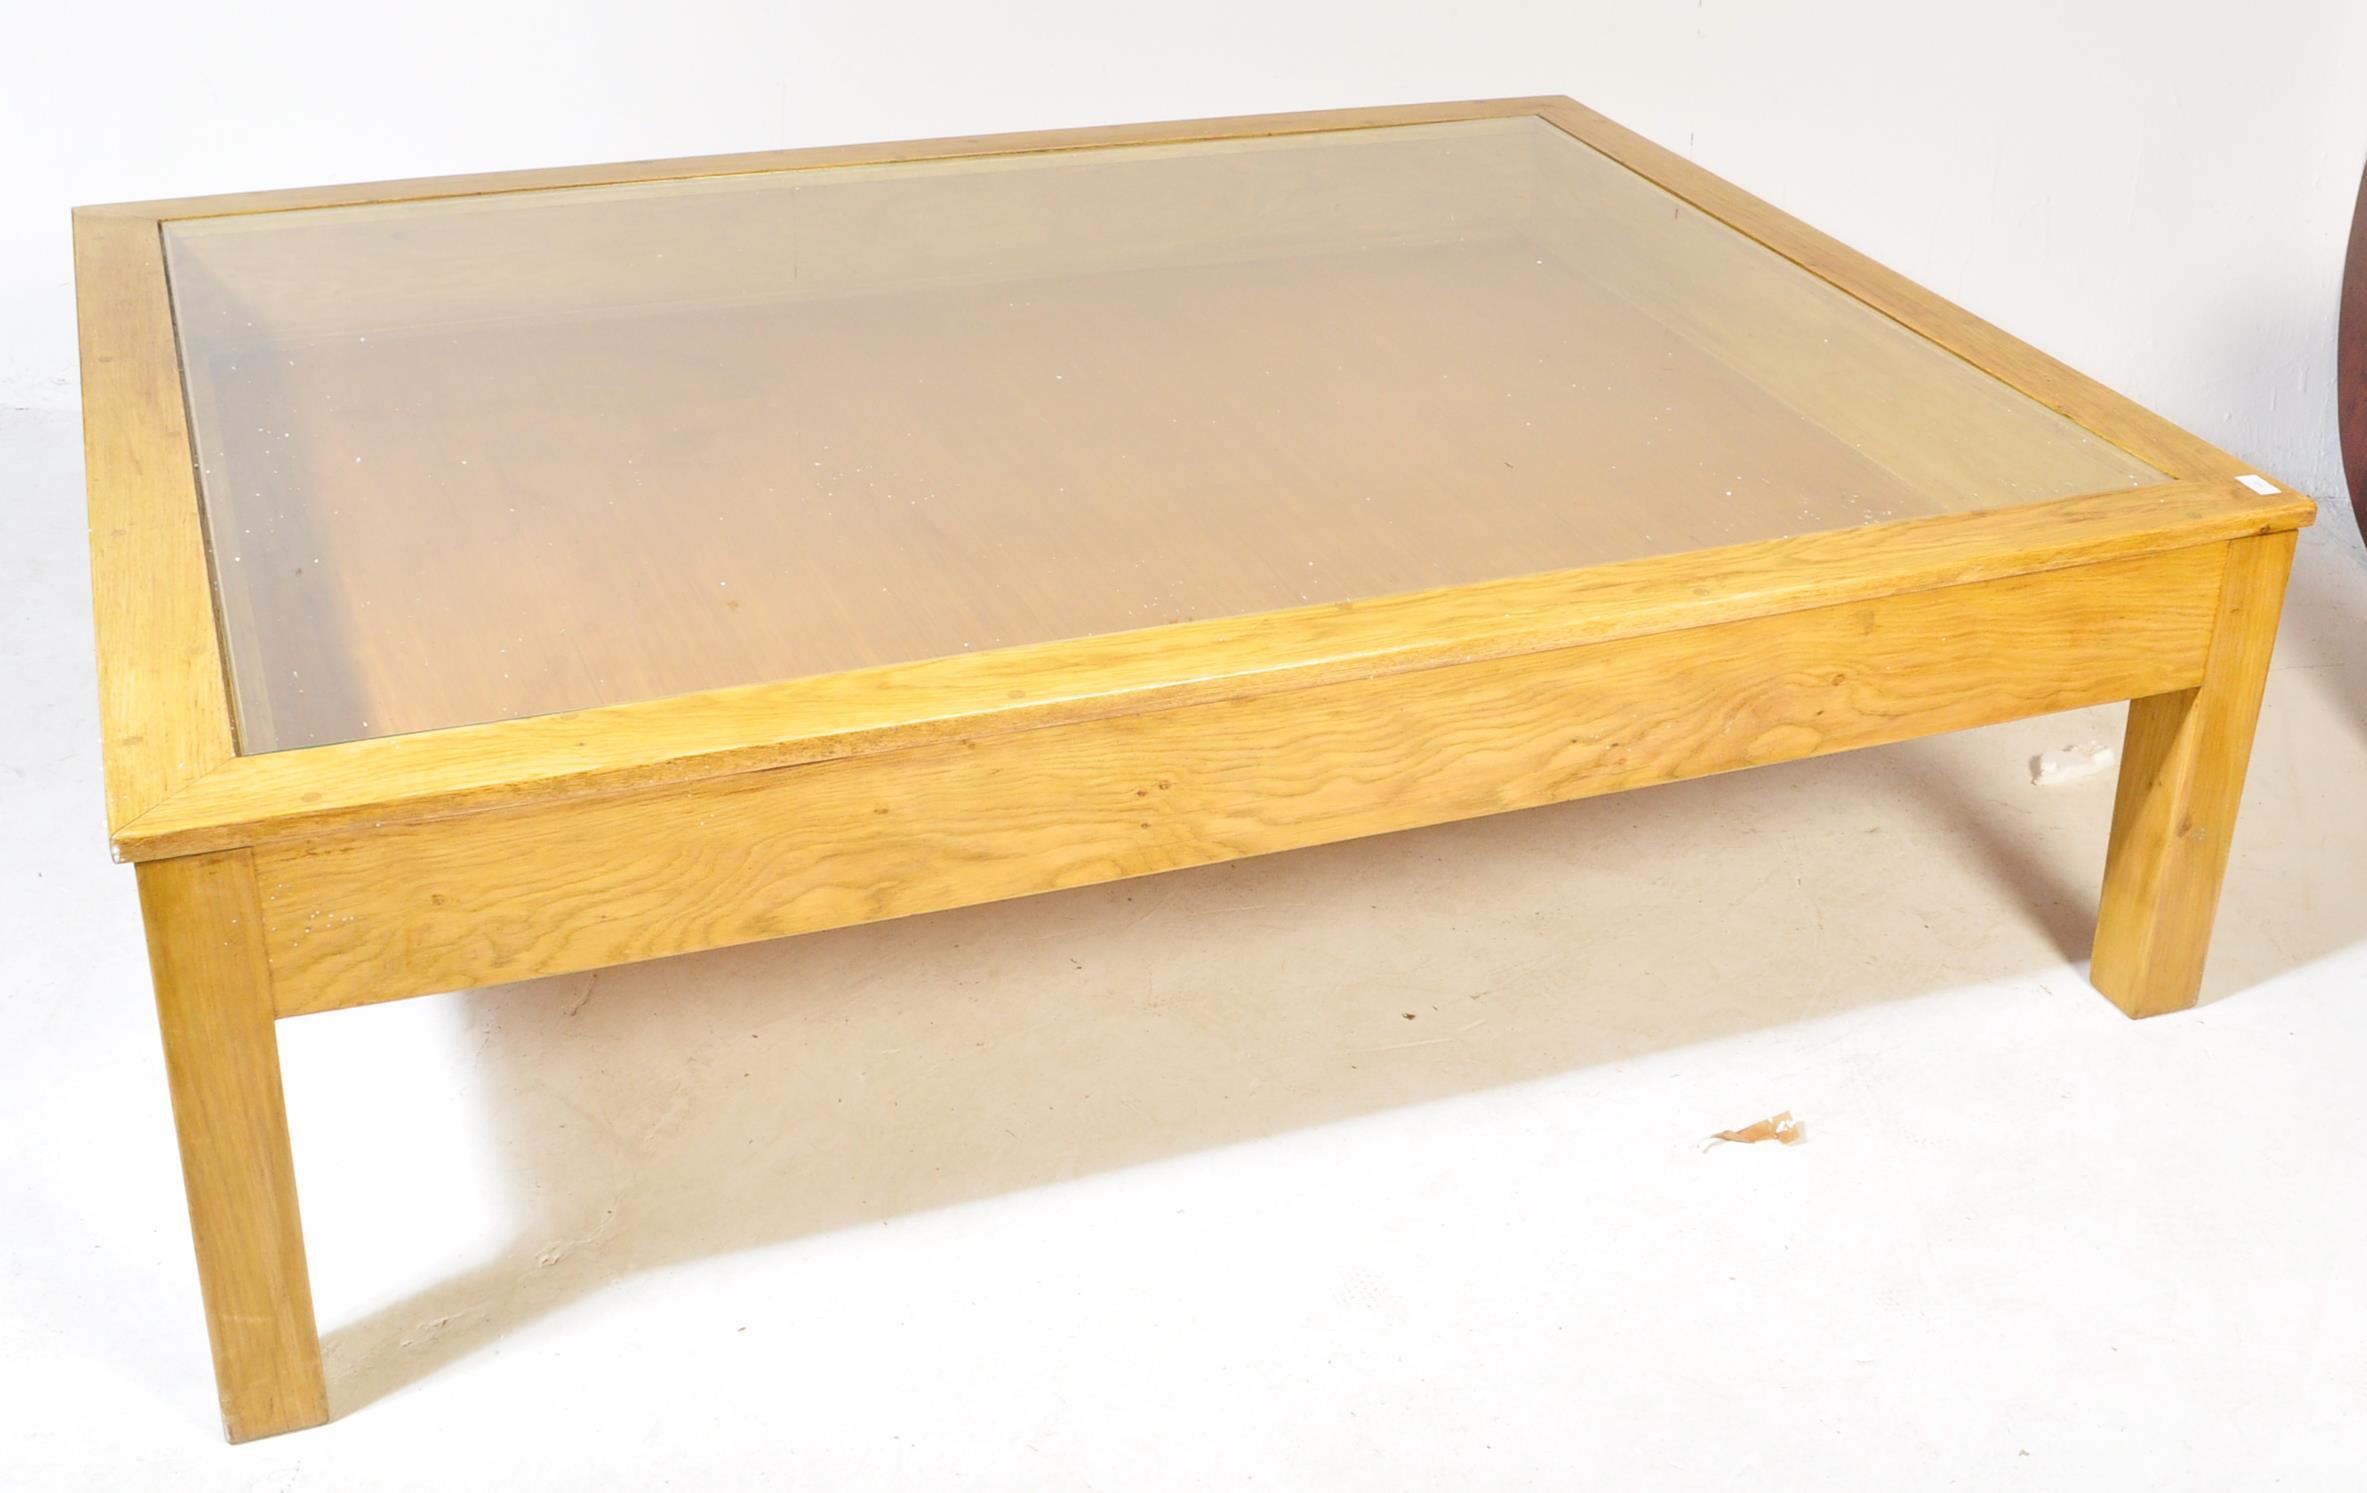 LARGE CONTEMPORARY OAK GLAZED COFFEE TABLE - Image 2 of 4